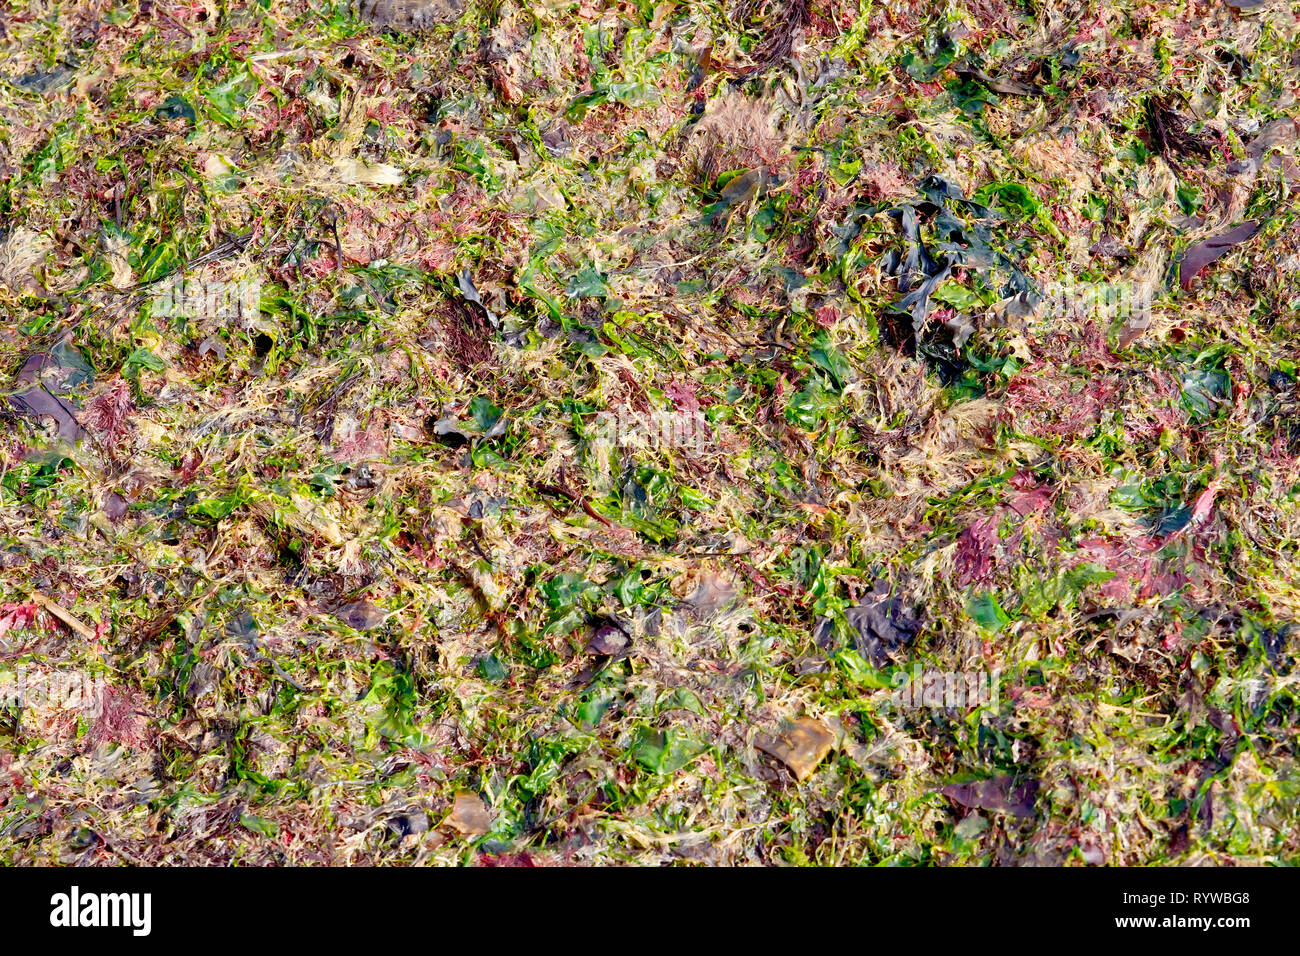 An abstract shot of various colourful seaweeds washed up on the beach after a stormy night. Stock Photo